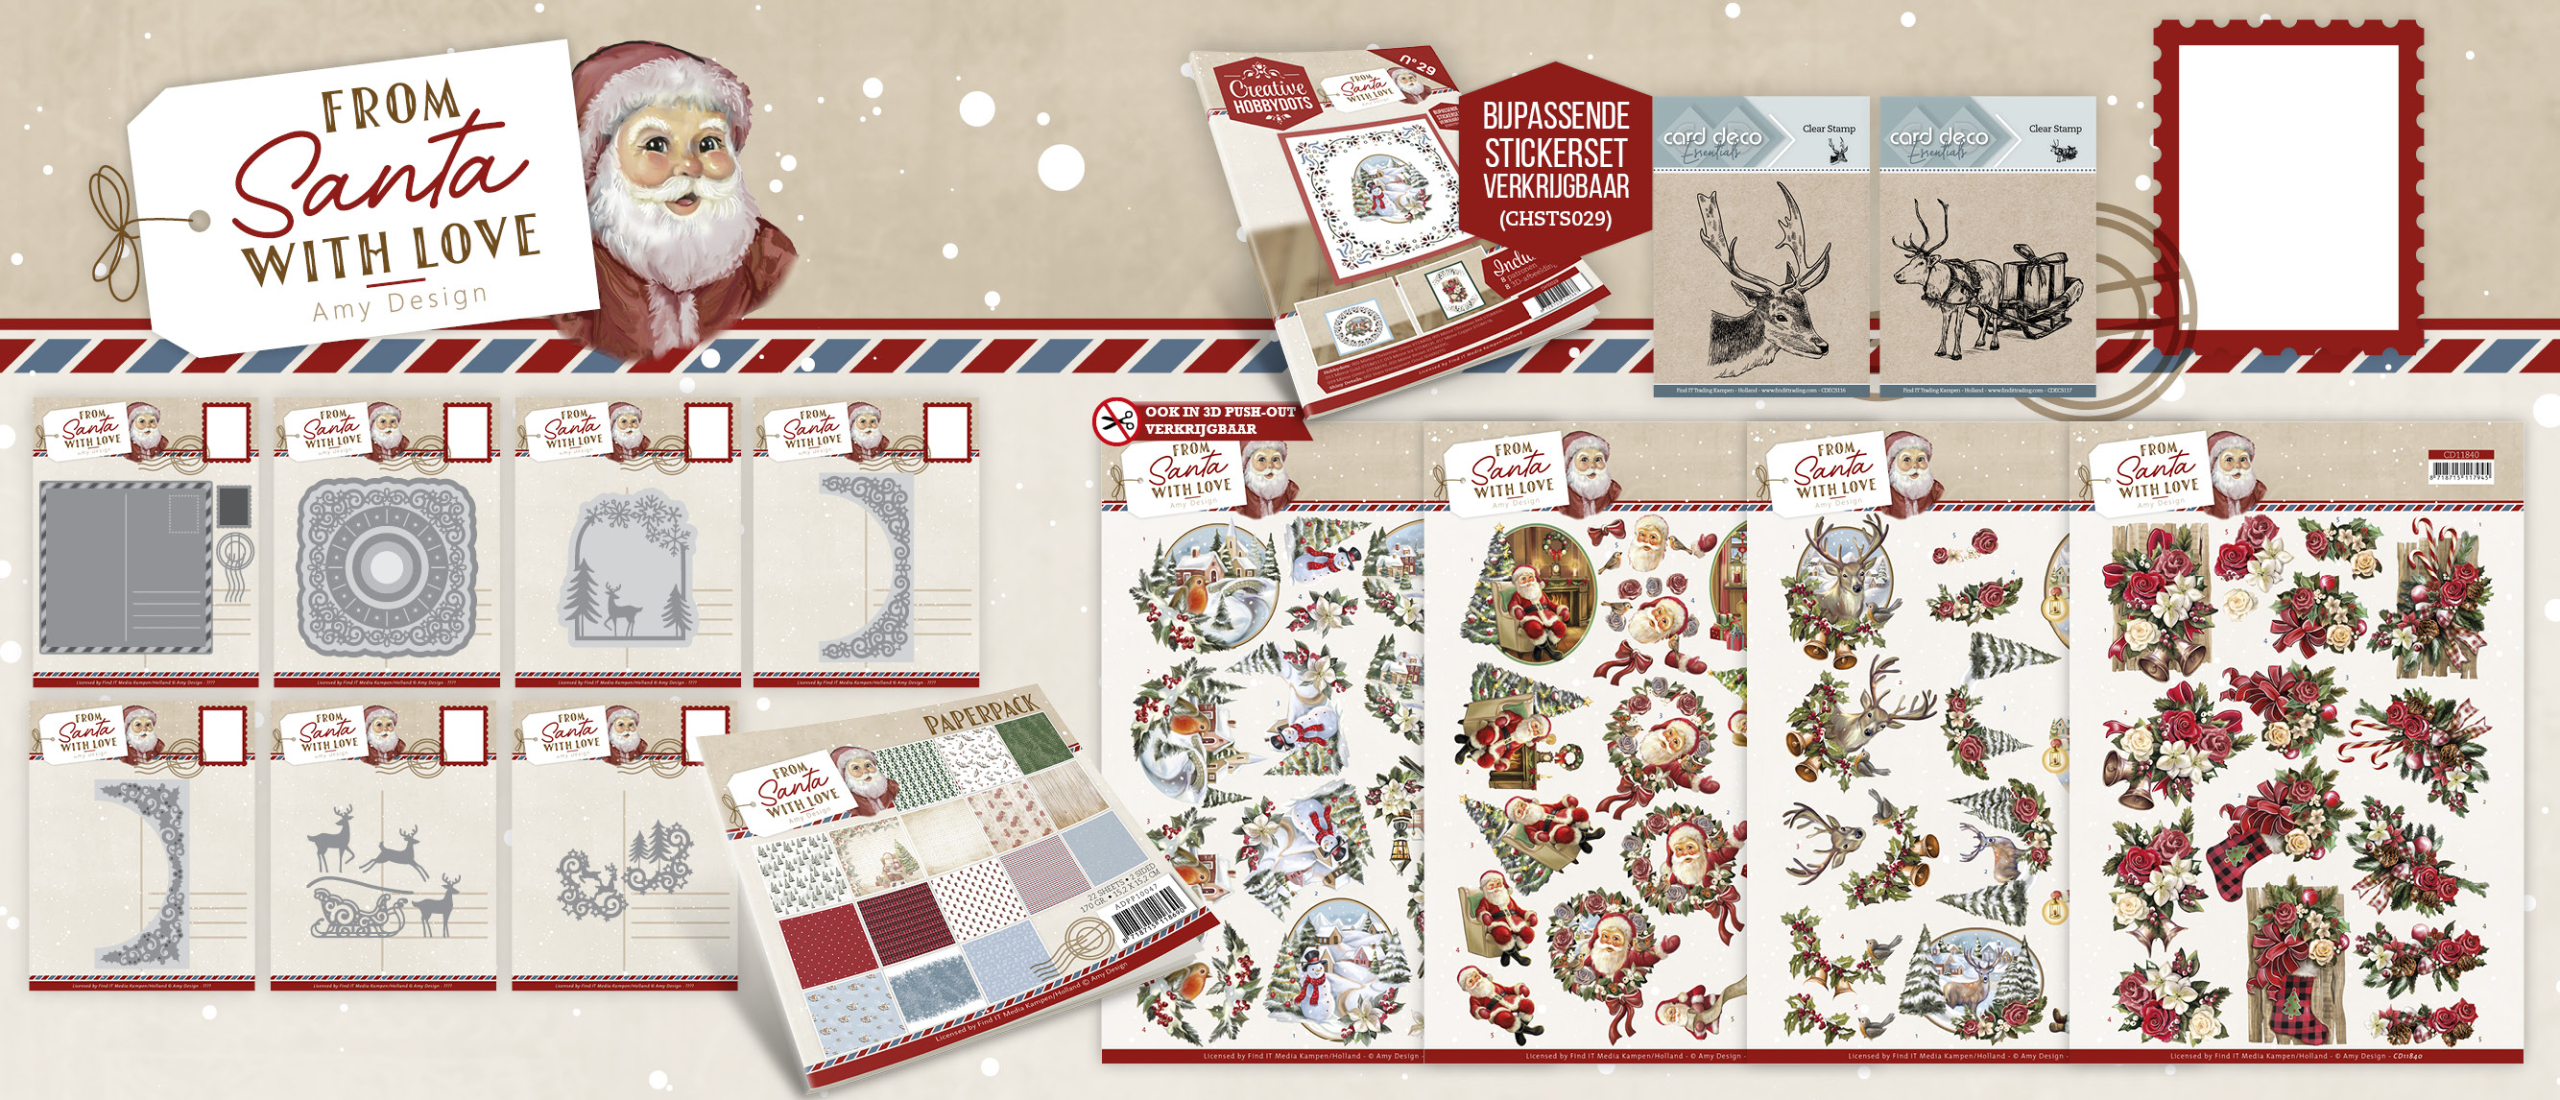 Nieuwe collectie: From Santa With Love - Amy Design